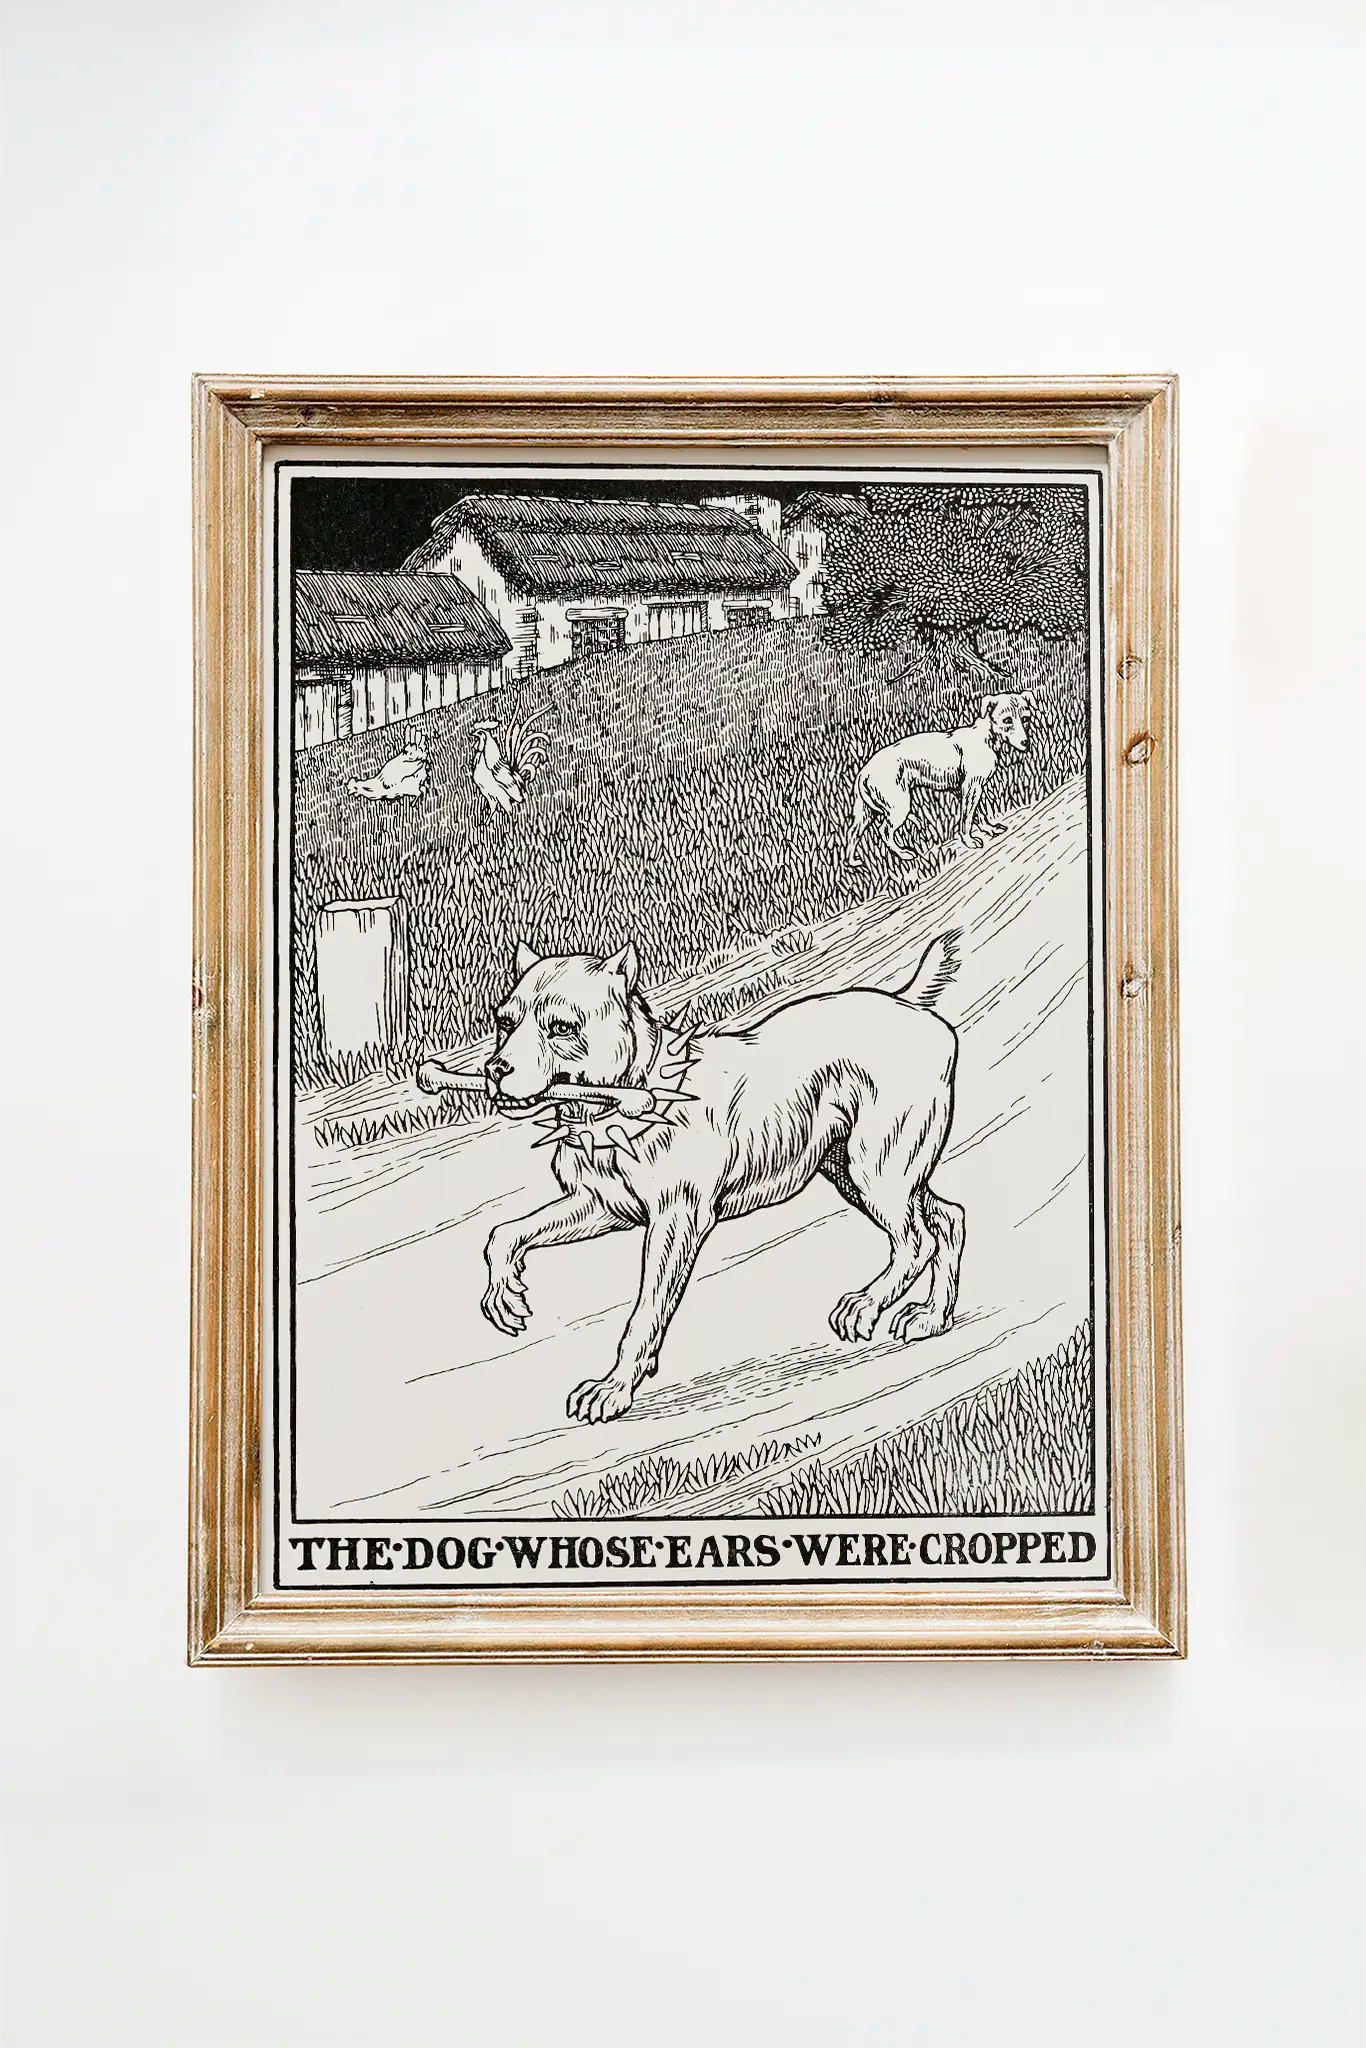 Percy J. Billinghurst - The Dog whose Ears were Cropped #131 vintage print reproduction printed by GalleryInk.Art, a store providing contemporary wall art prints